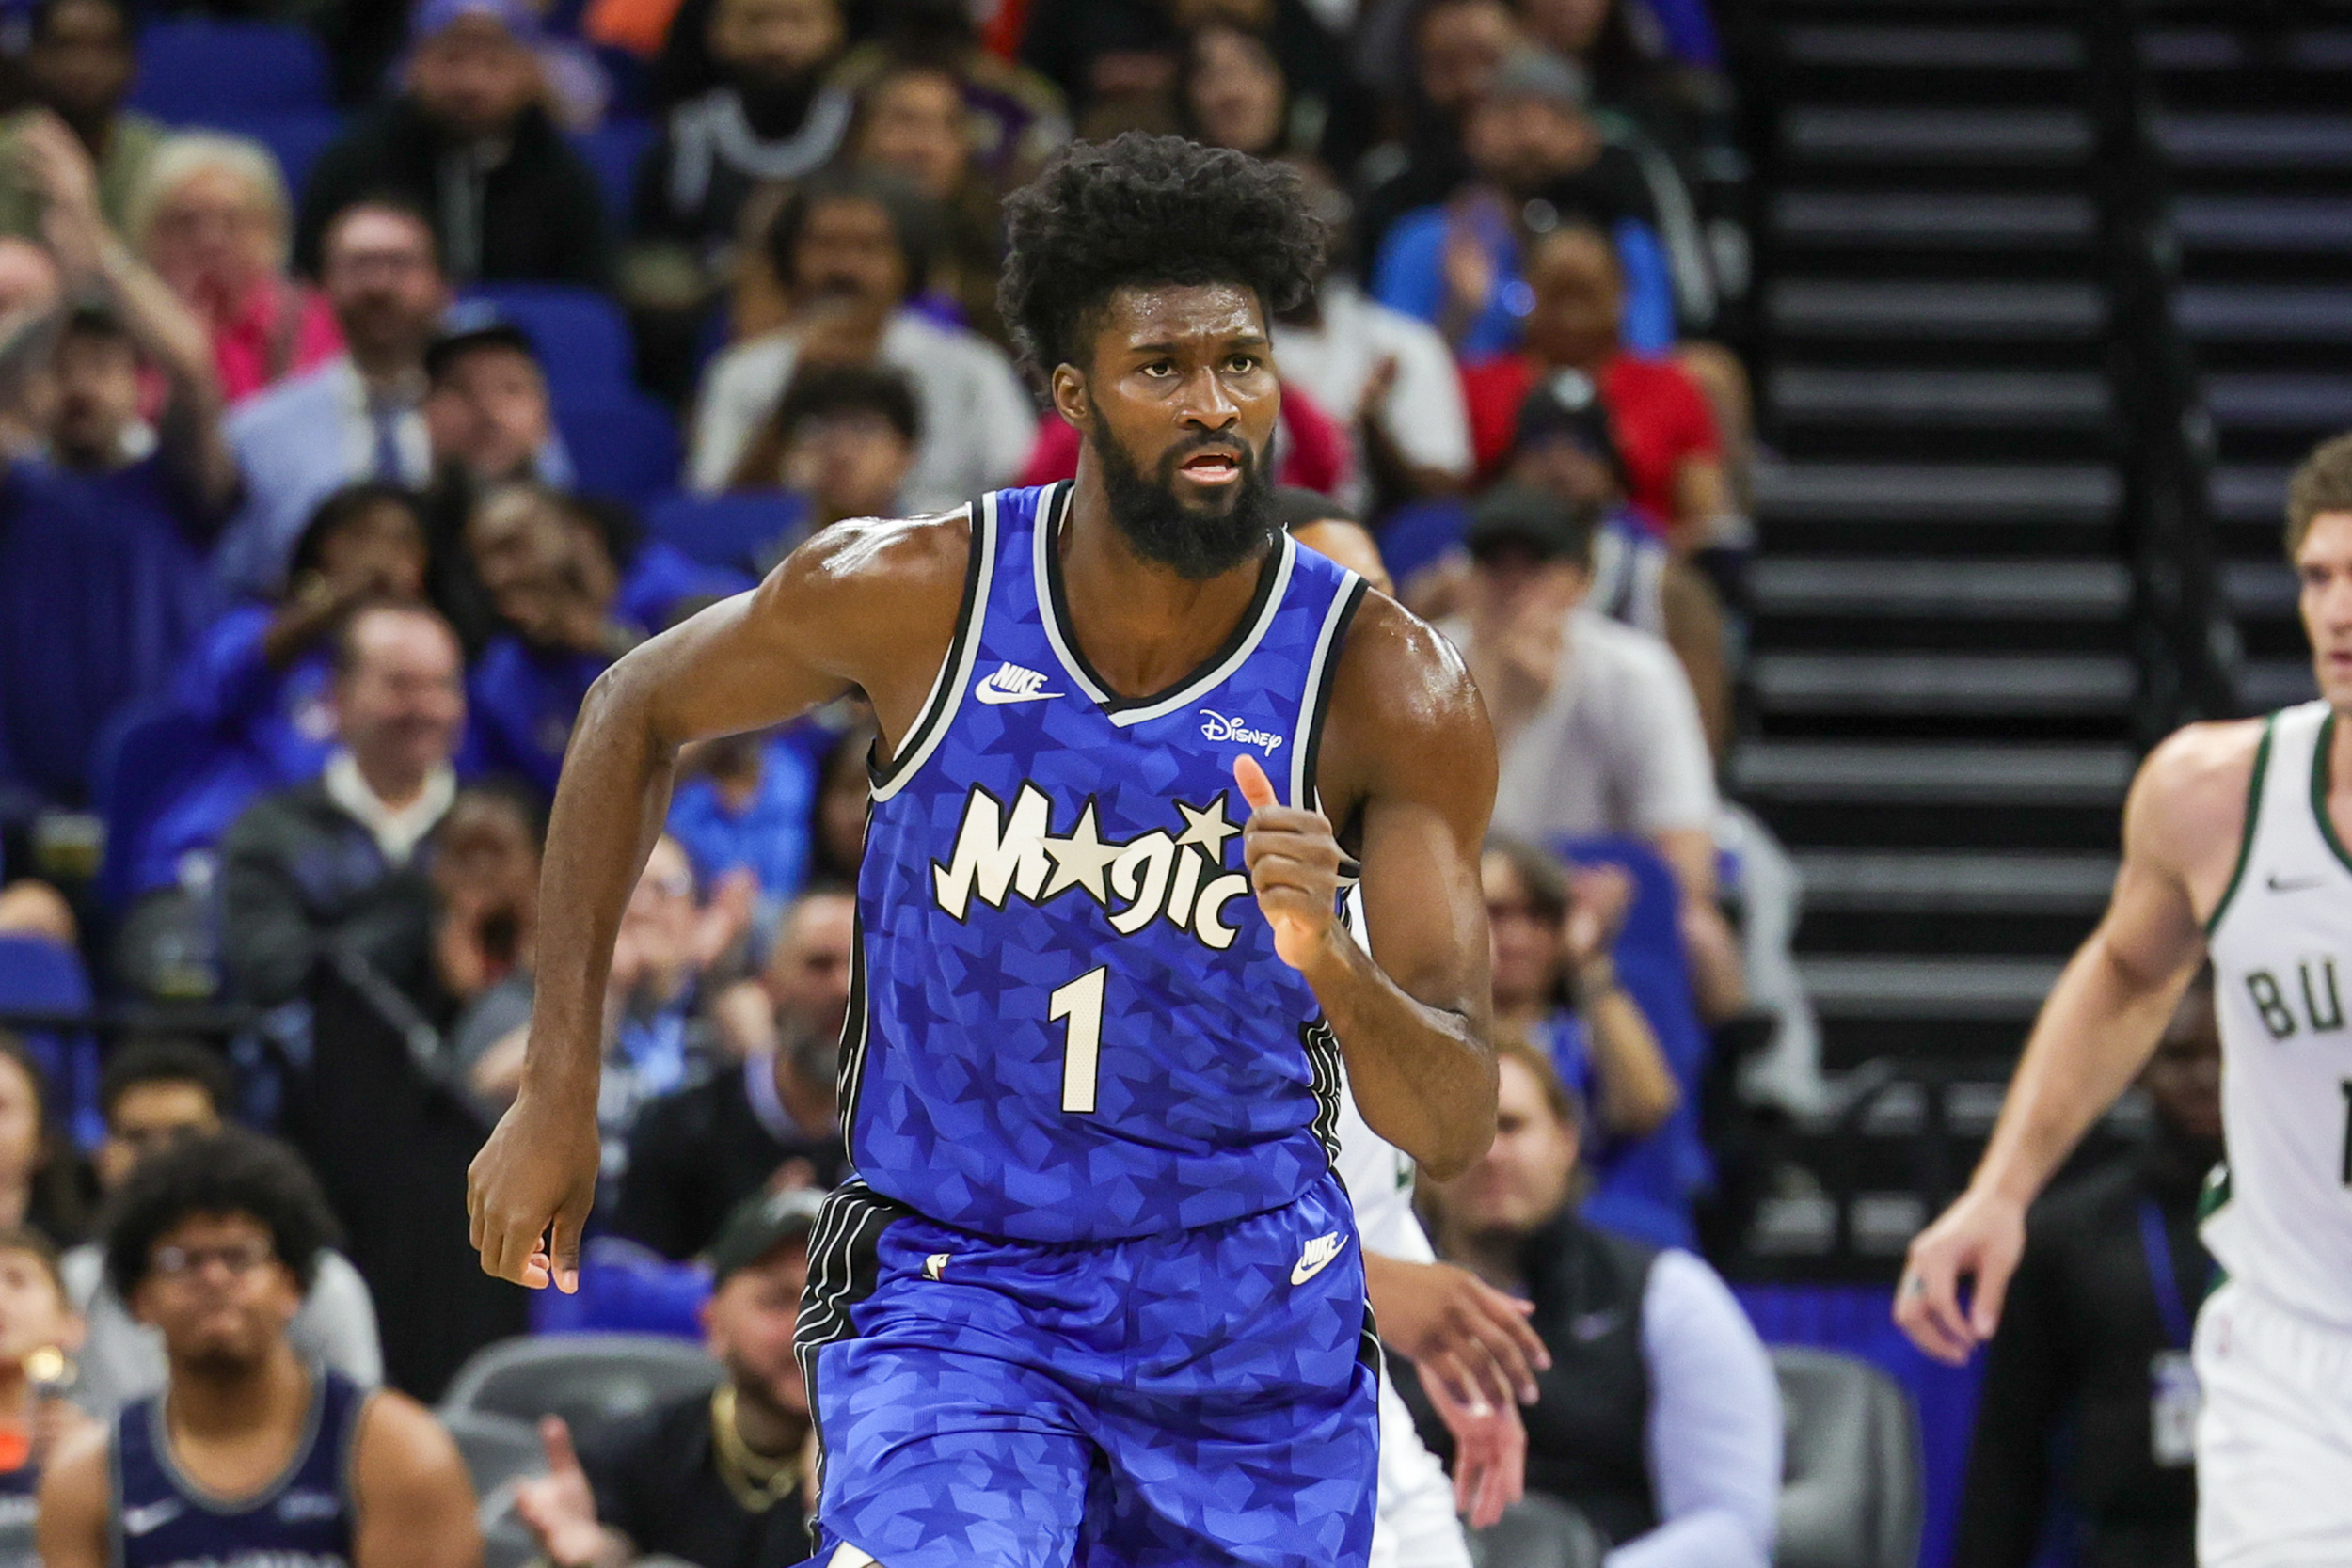 oft-injured magic bench player lives up to nickname with impressive stat